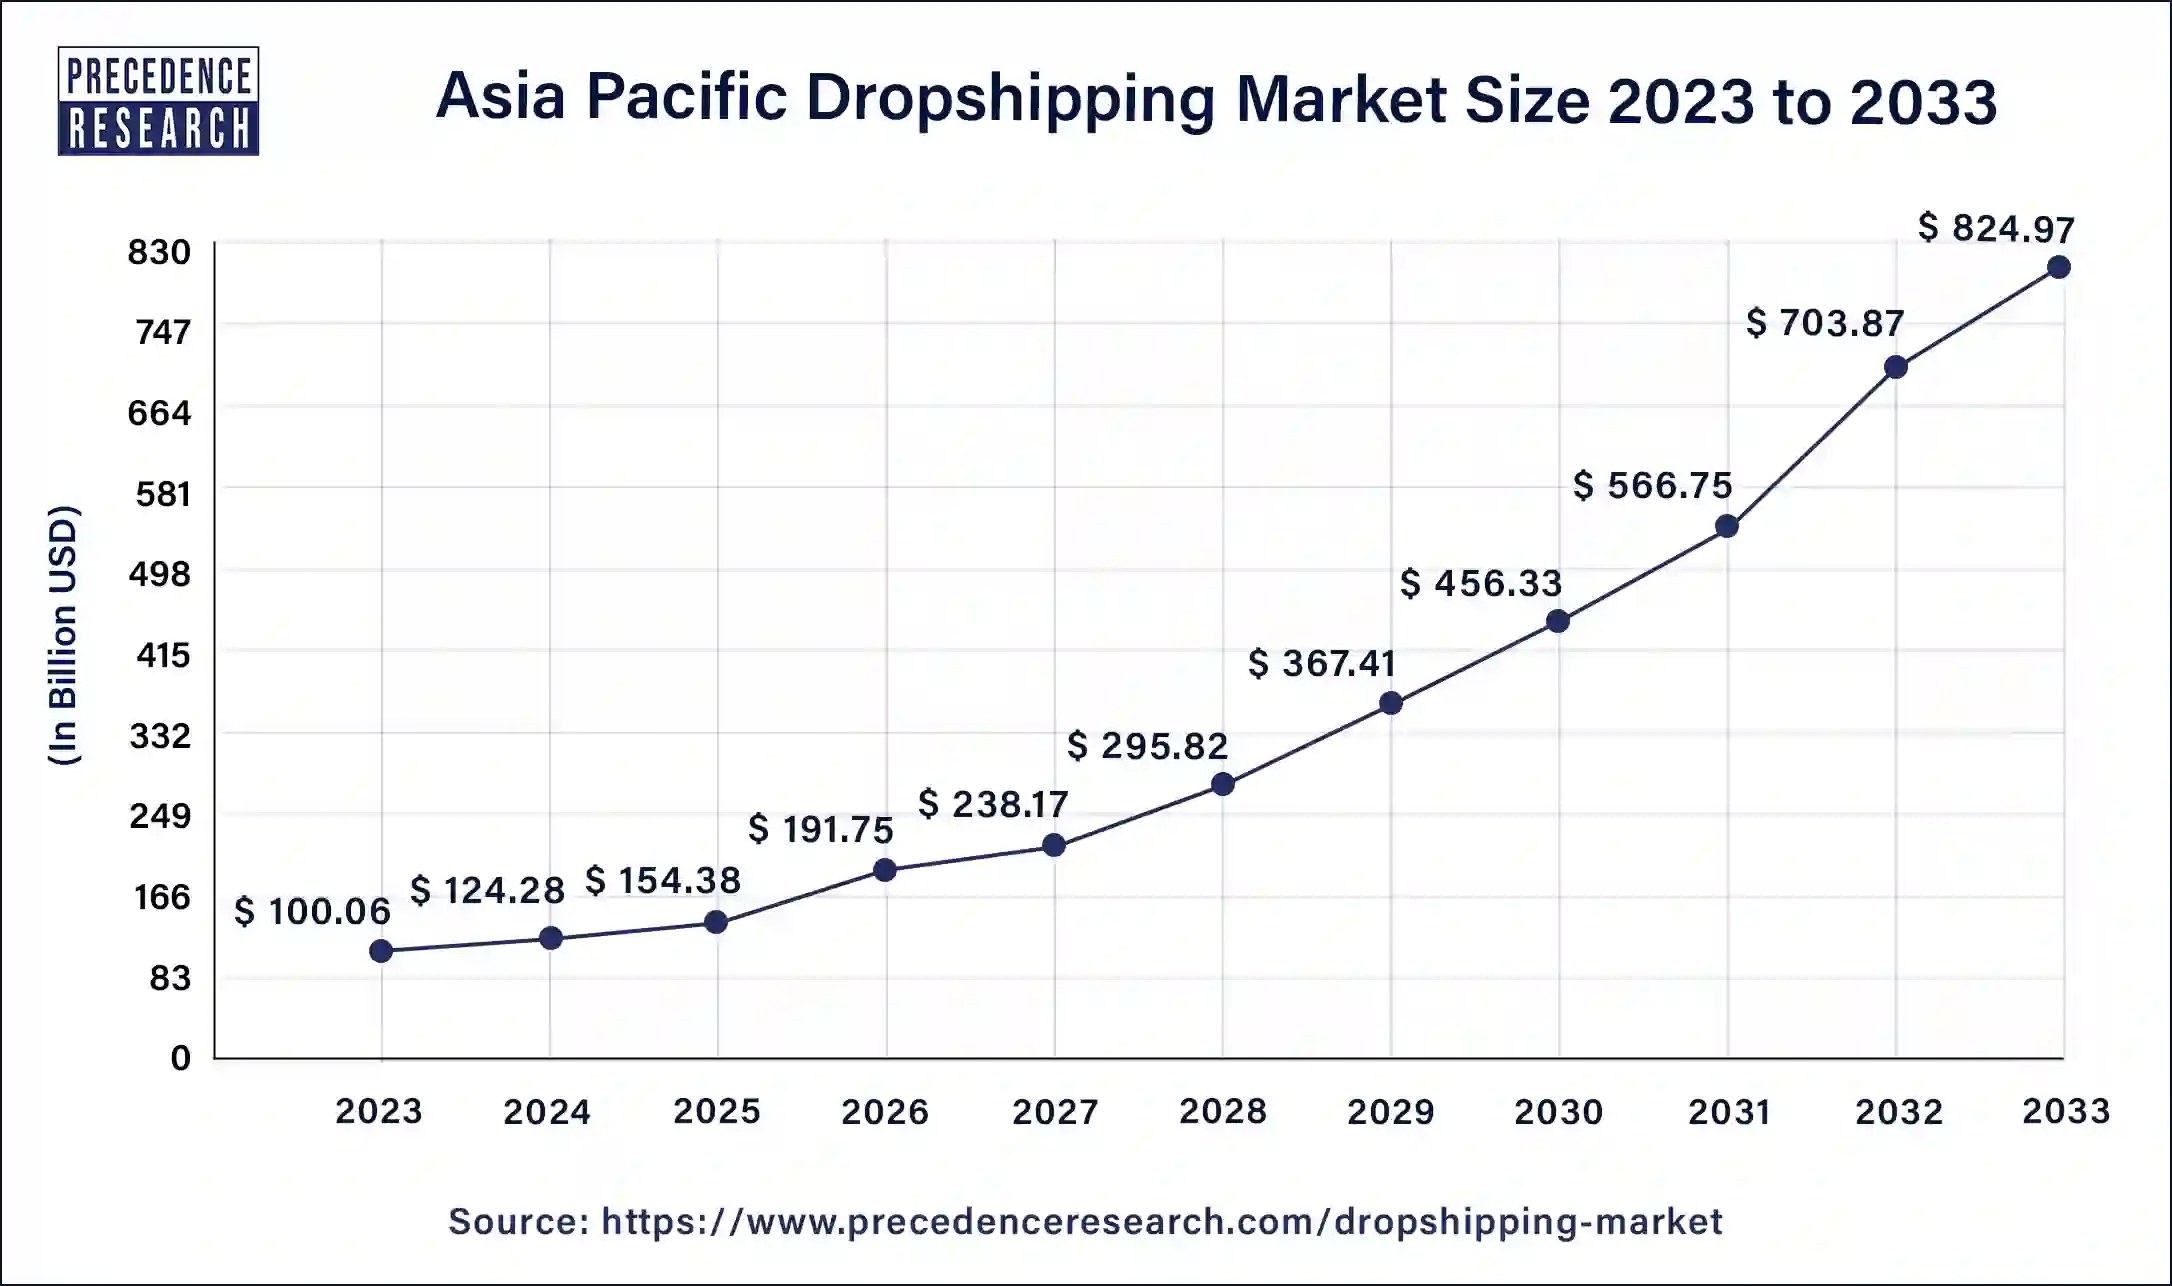 Asia Pacific Dropshipping Market Size 2024 to 2033